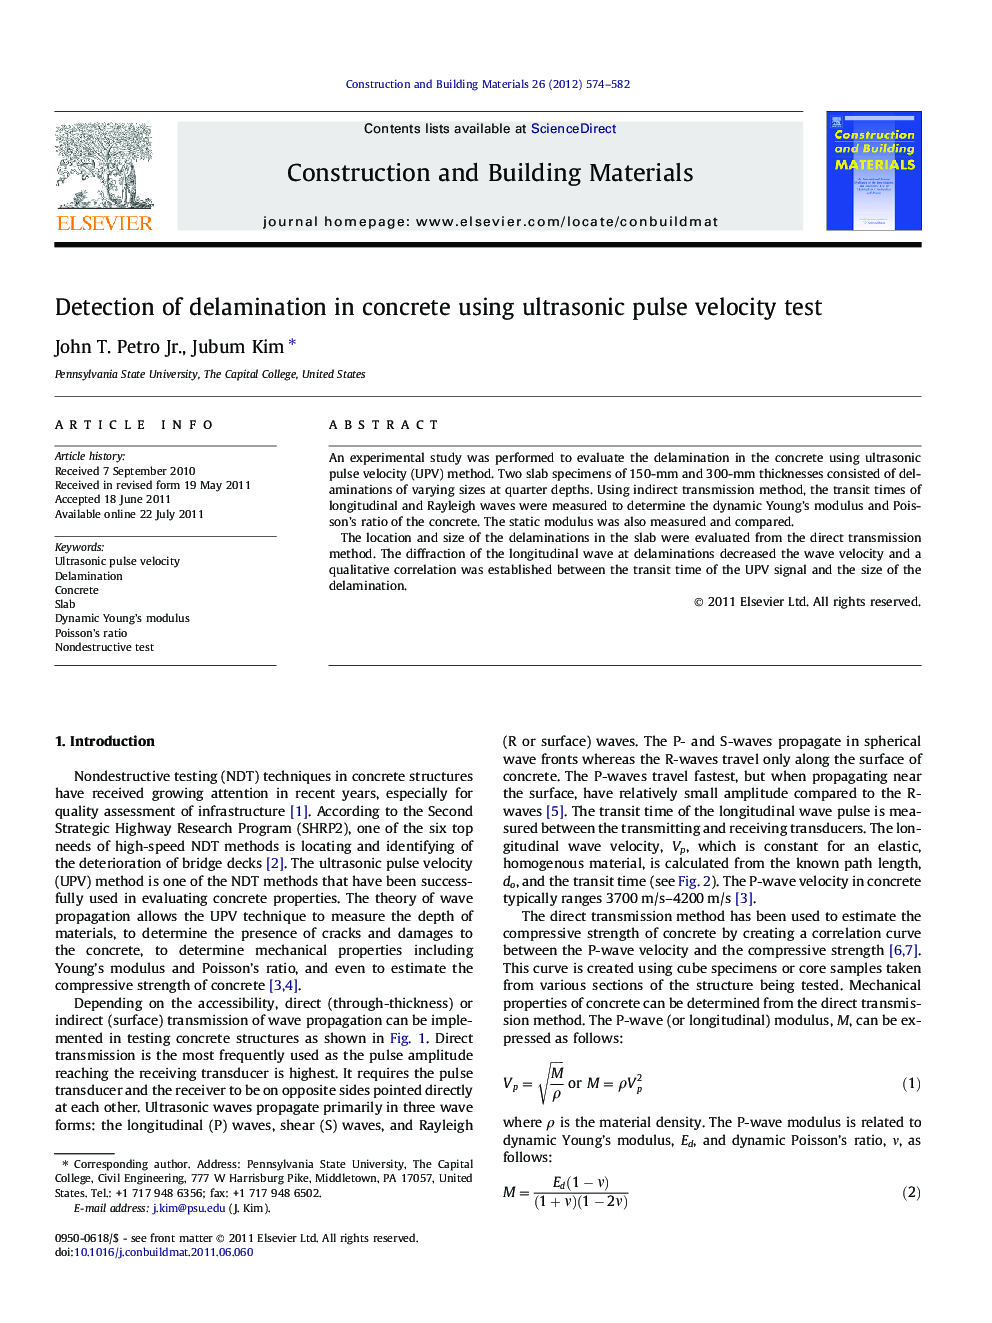 Detection of delamination in concrete using ultrasonic pulse velocity test